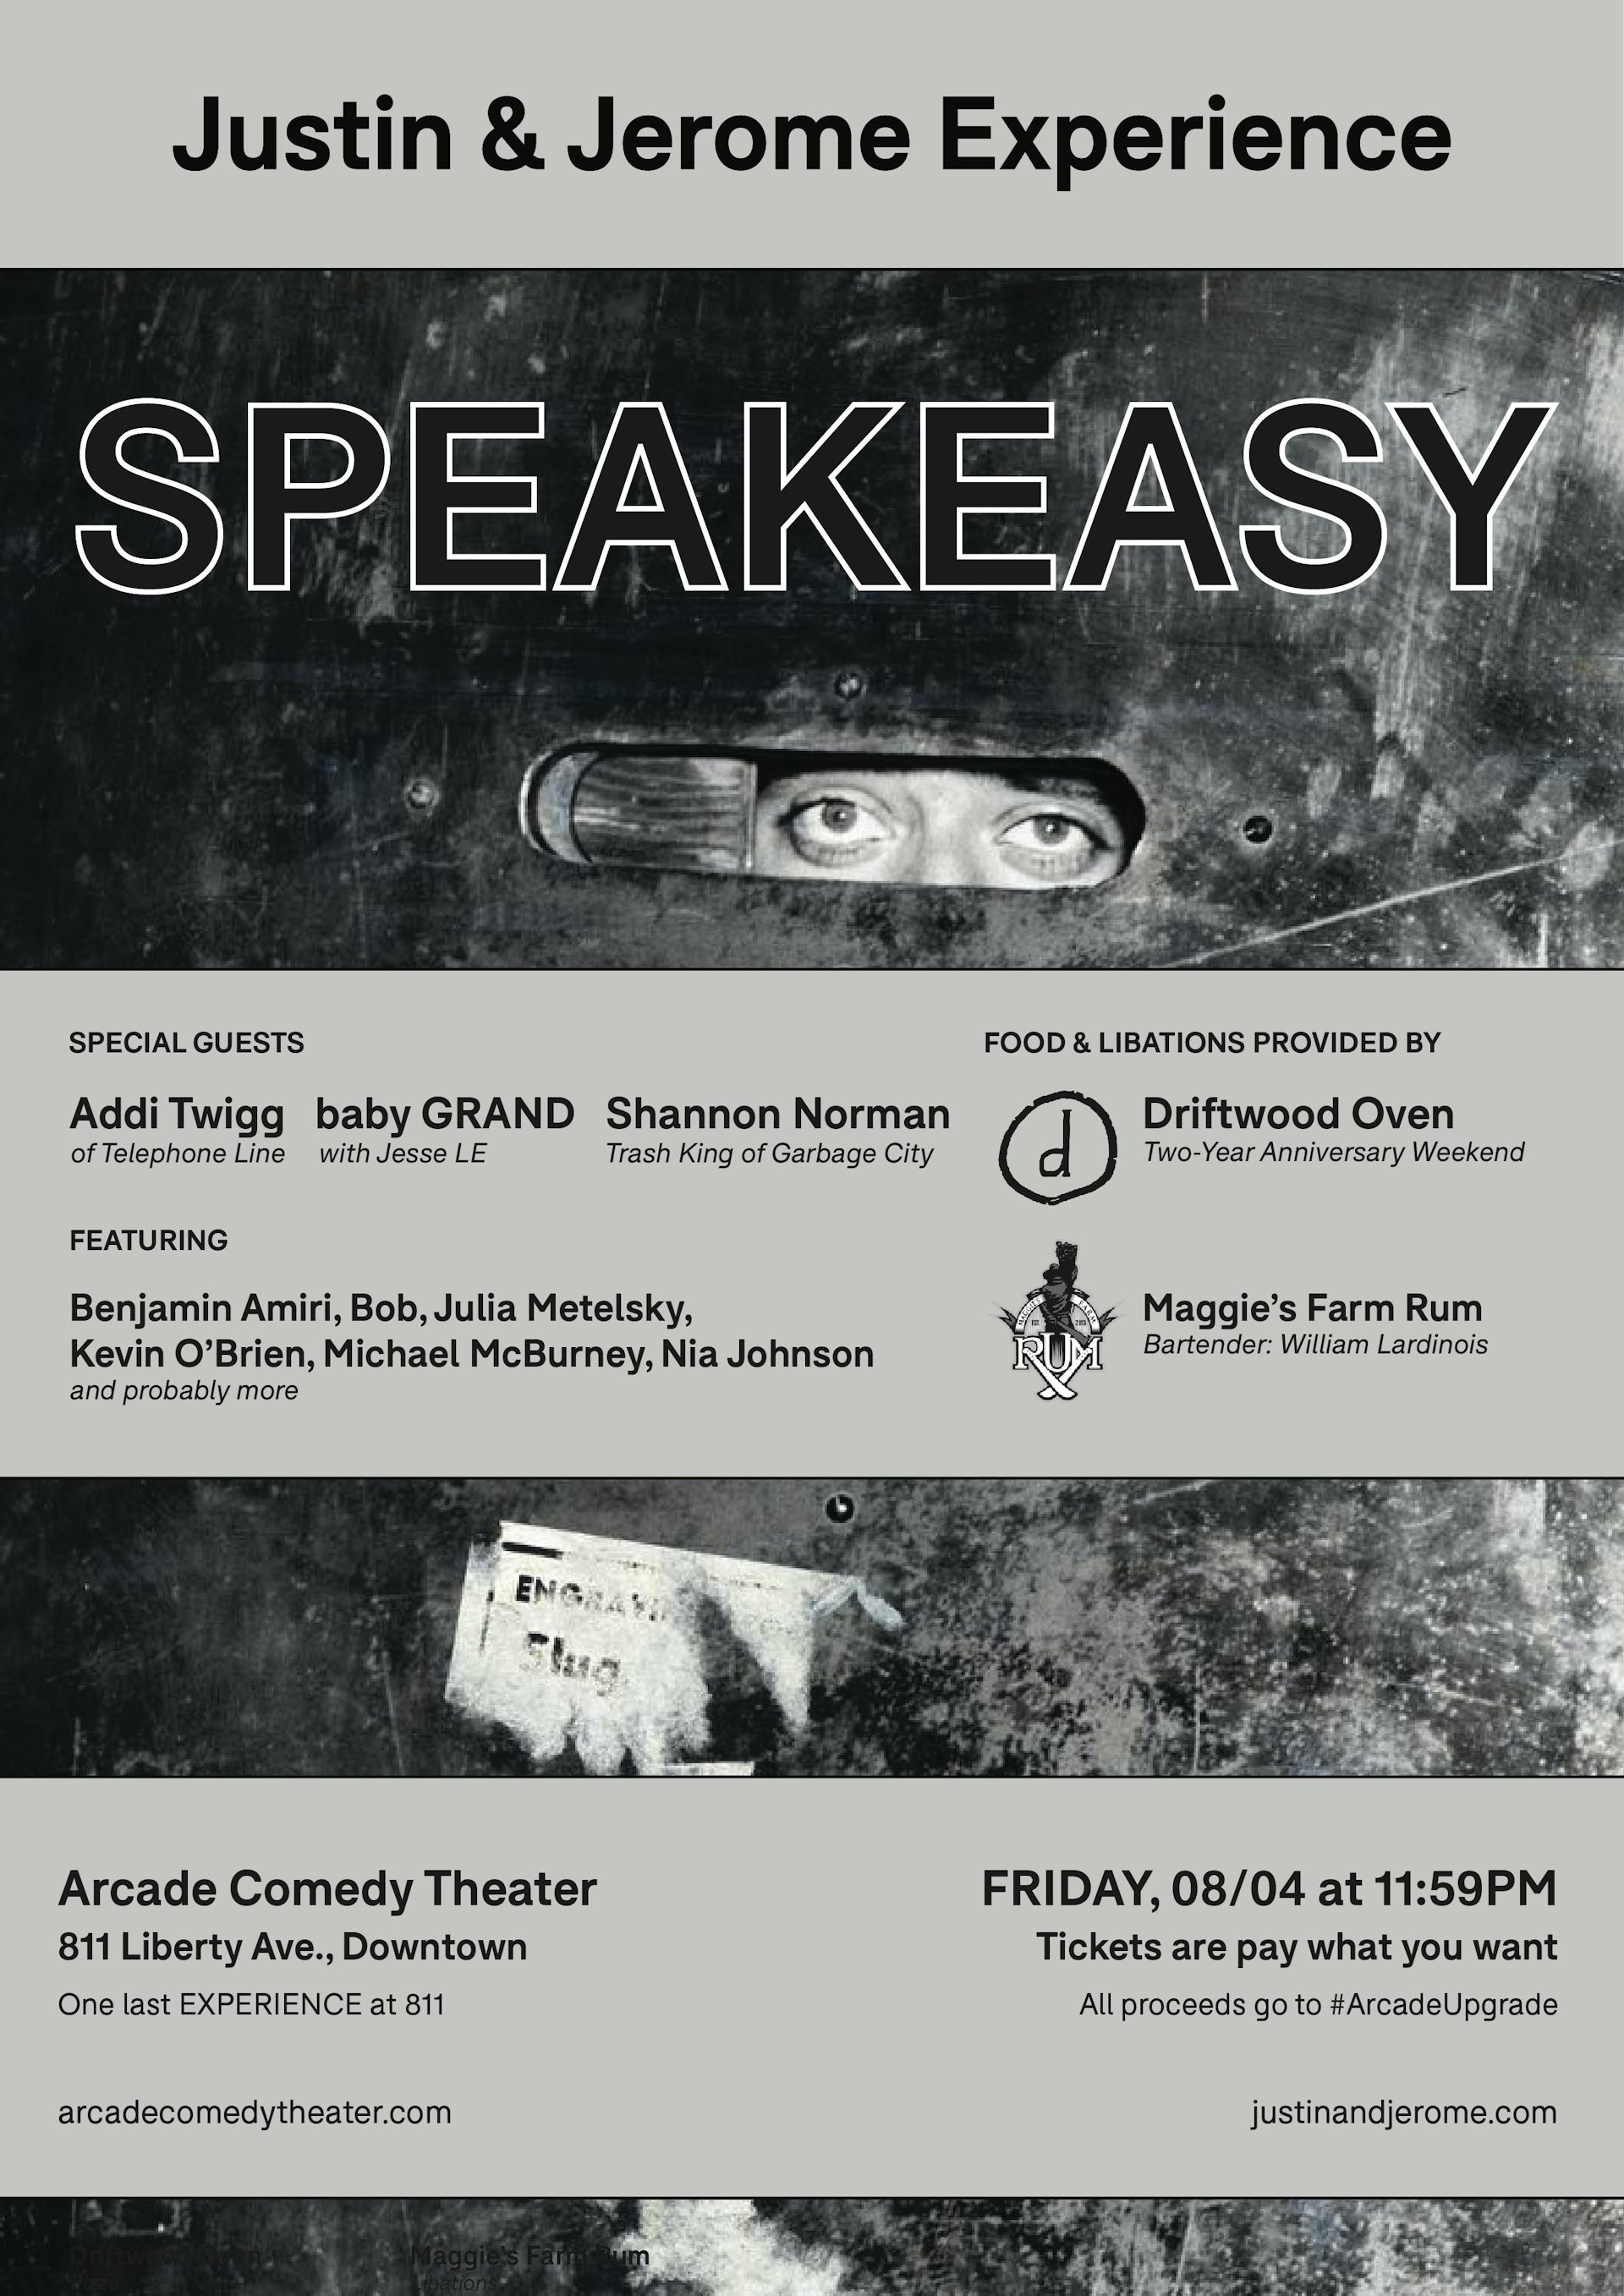 A show poster for the JJE show “Speakeasy.” It is very text heavy with show details and logos of companies that helped put the show on like Driftwood Oven and Maggie’s Farm Rum. The main image part is a giant secretive door that has two eyes peering out of it from a slot that has been slid over. Looks like someone just knocked on the door and this person is asking for the password, because baby this is a Speakeasy.